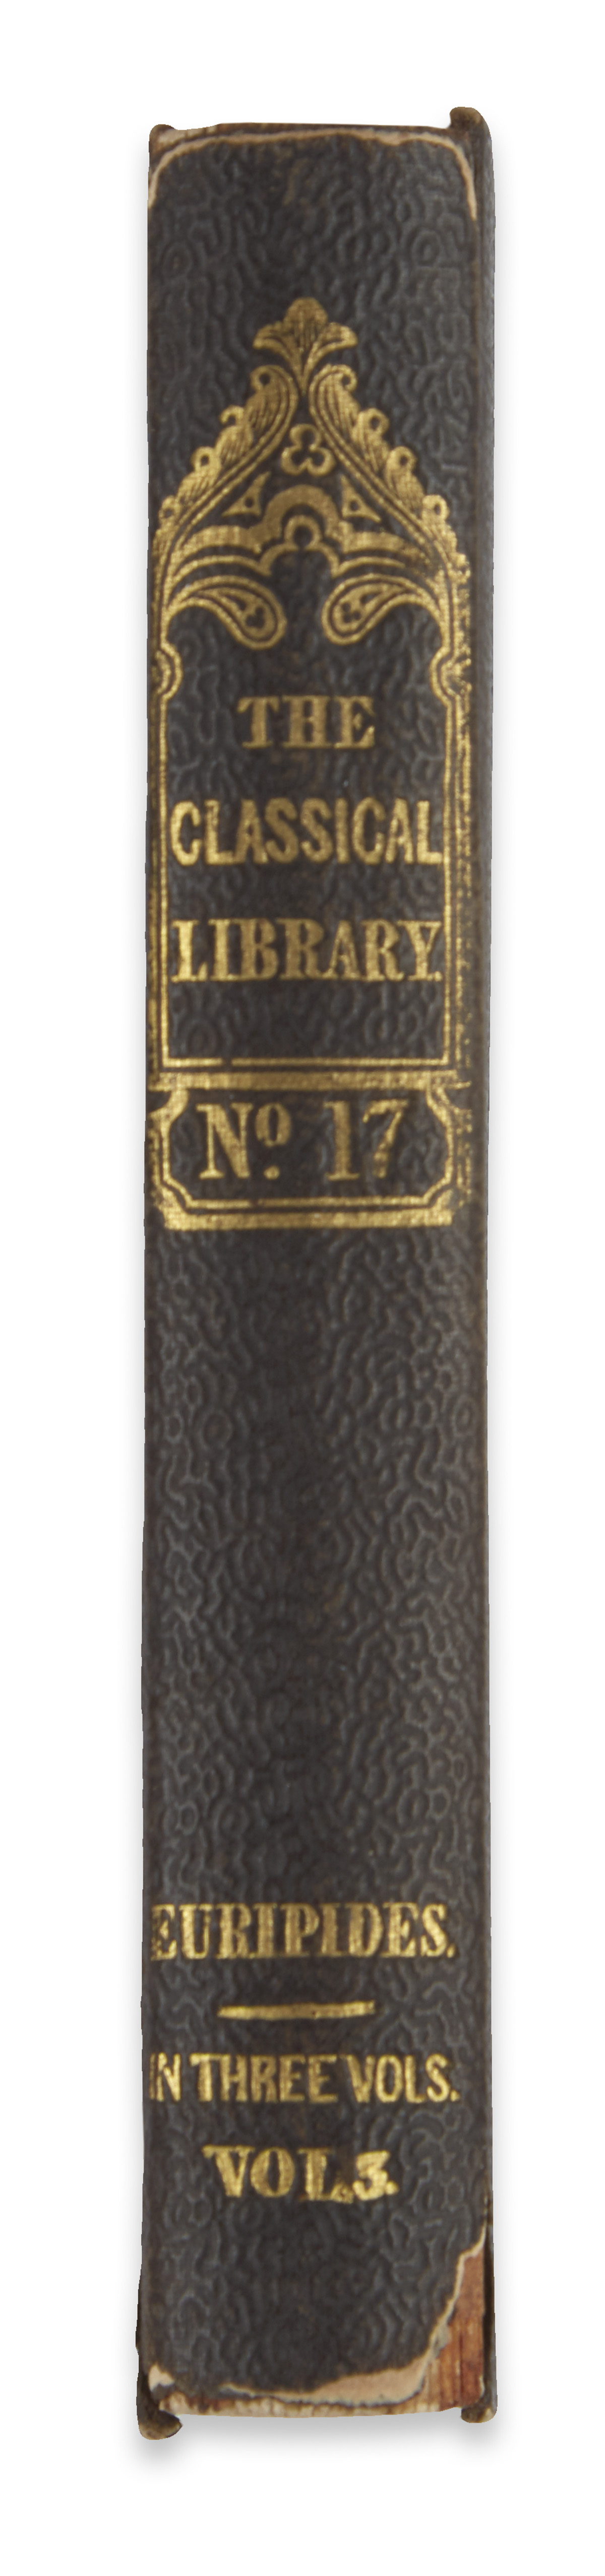 MELVILLE, HERMAN. Two volumes, the first Signed, H. Melville / N.Y., on the front free endpaper, and annotated throughout with over 1